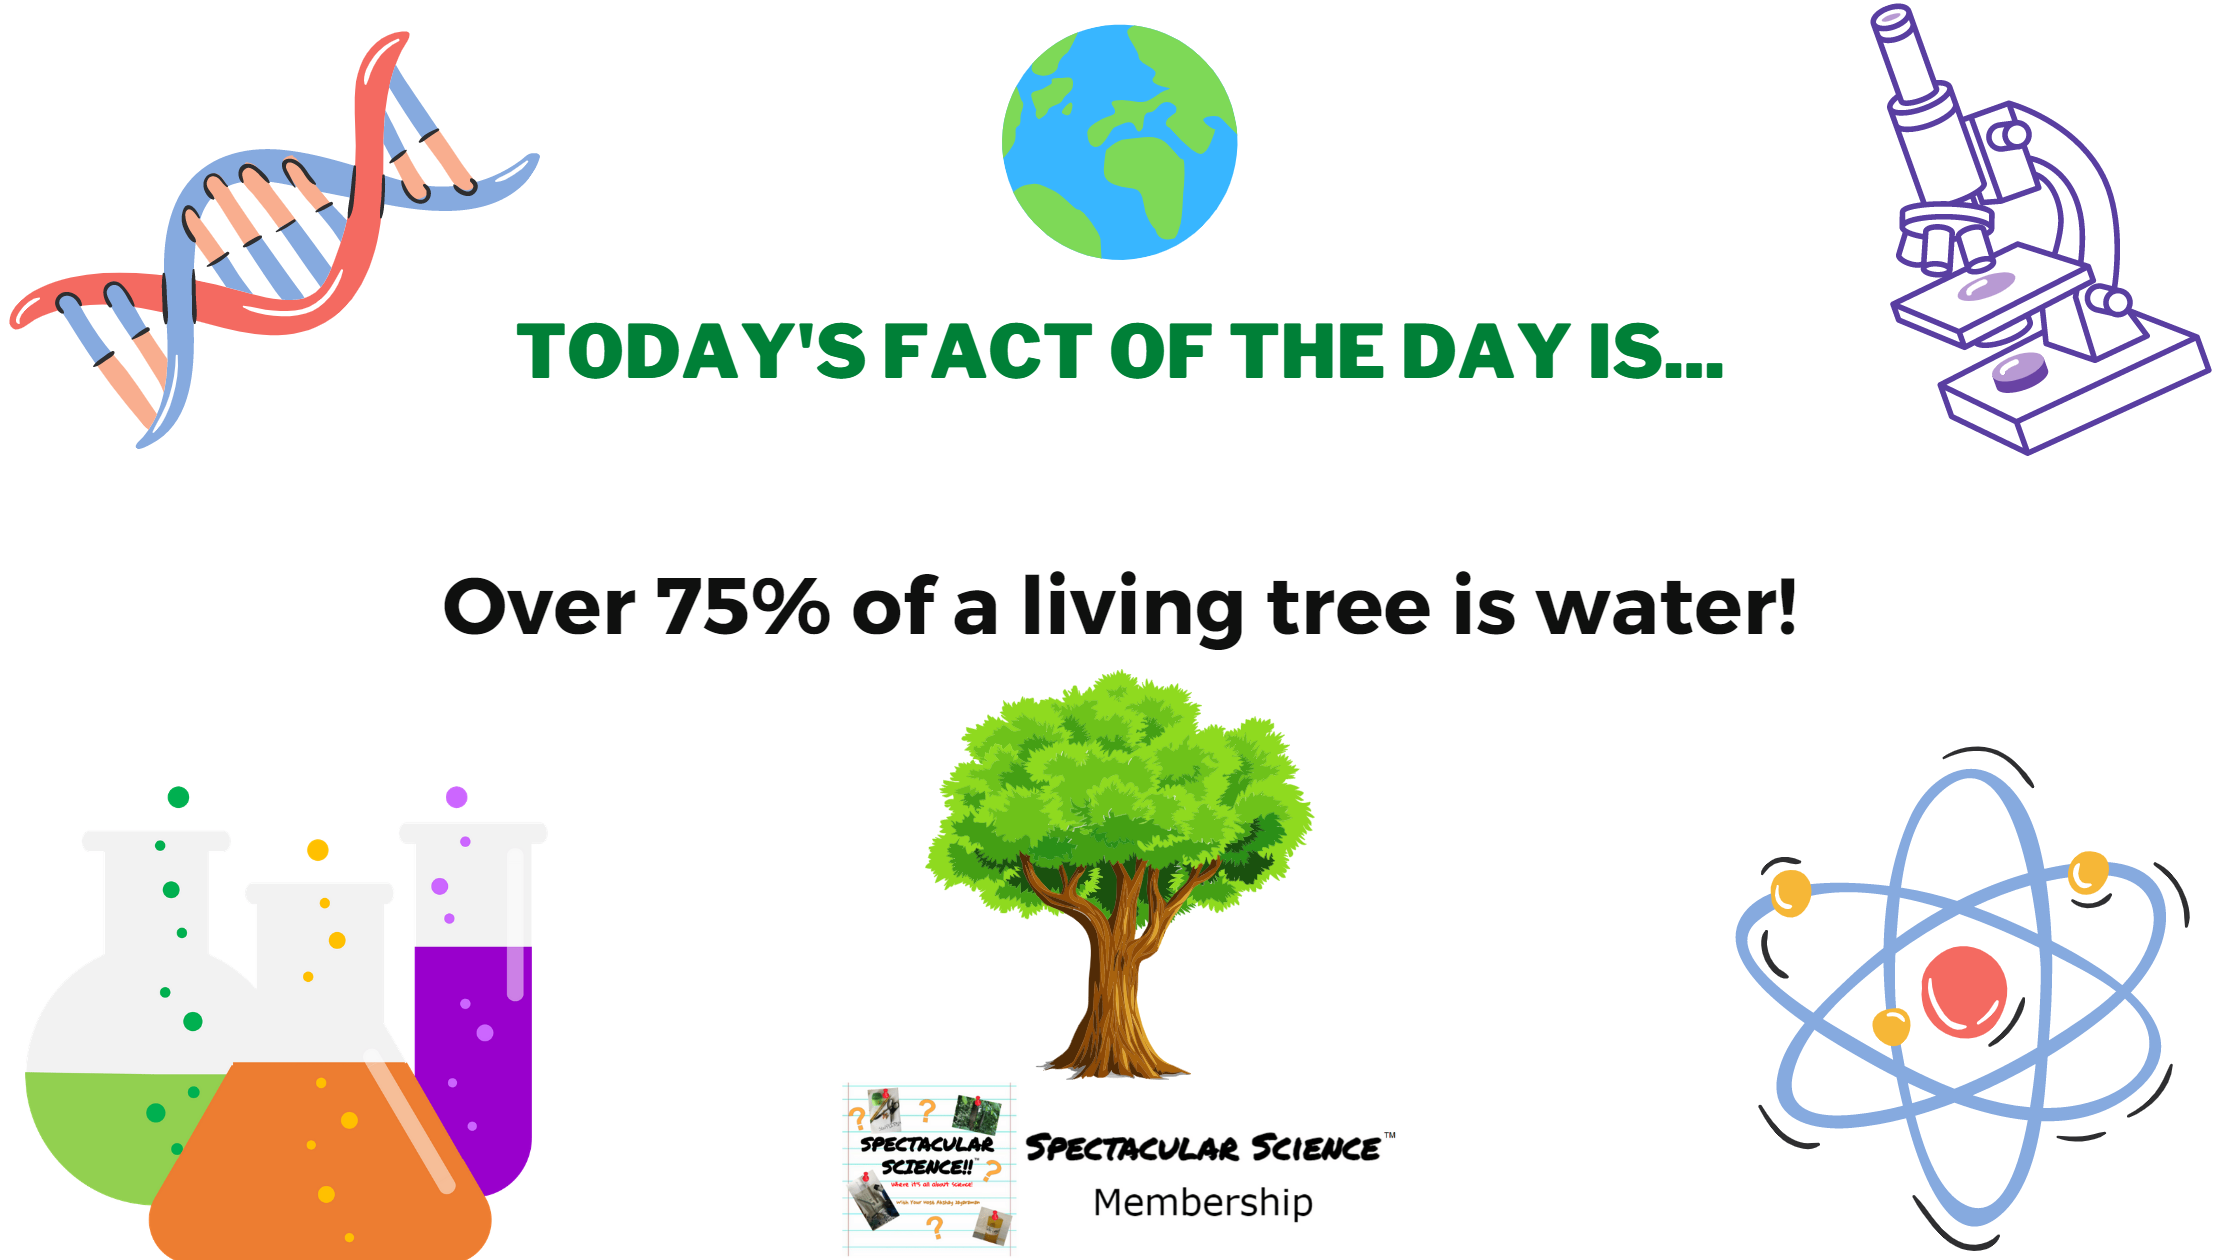 Fact of the Day Image November 27th